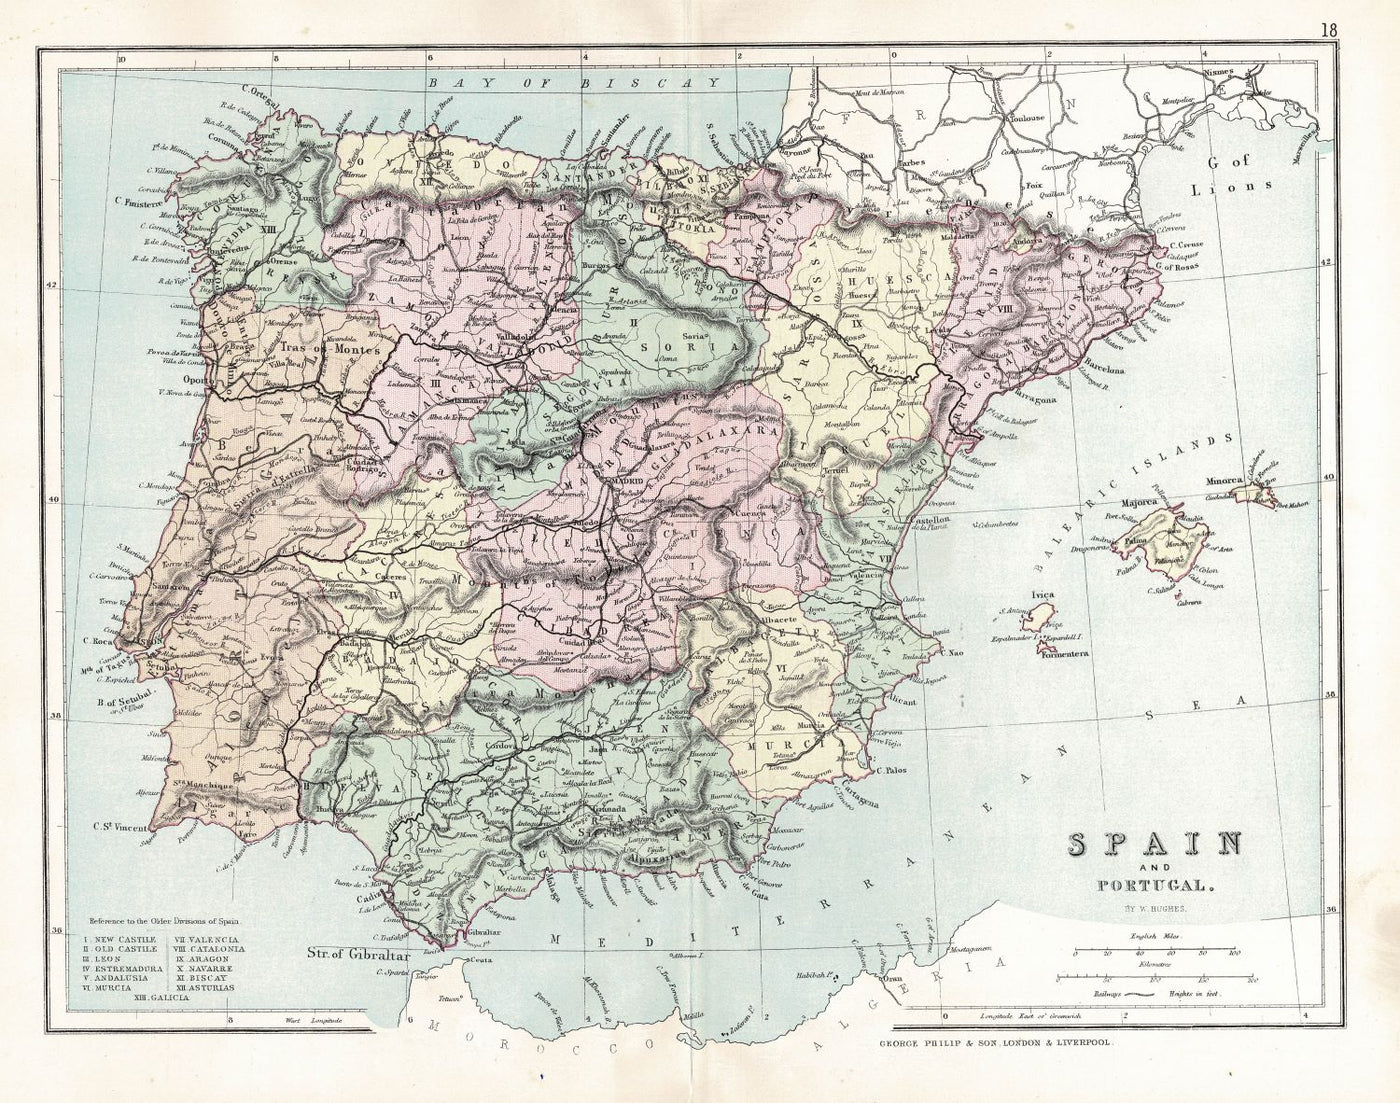 Spain and Portugal Iberian Peninsula antique map 1891